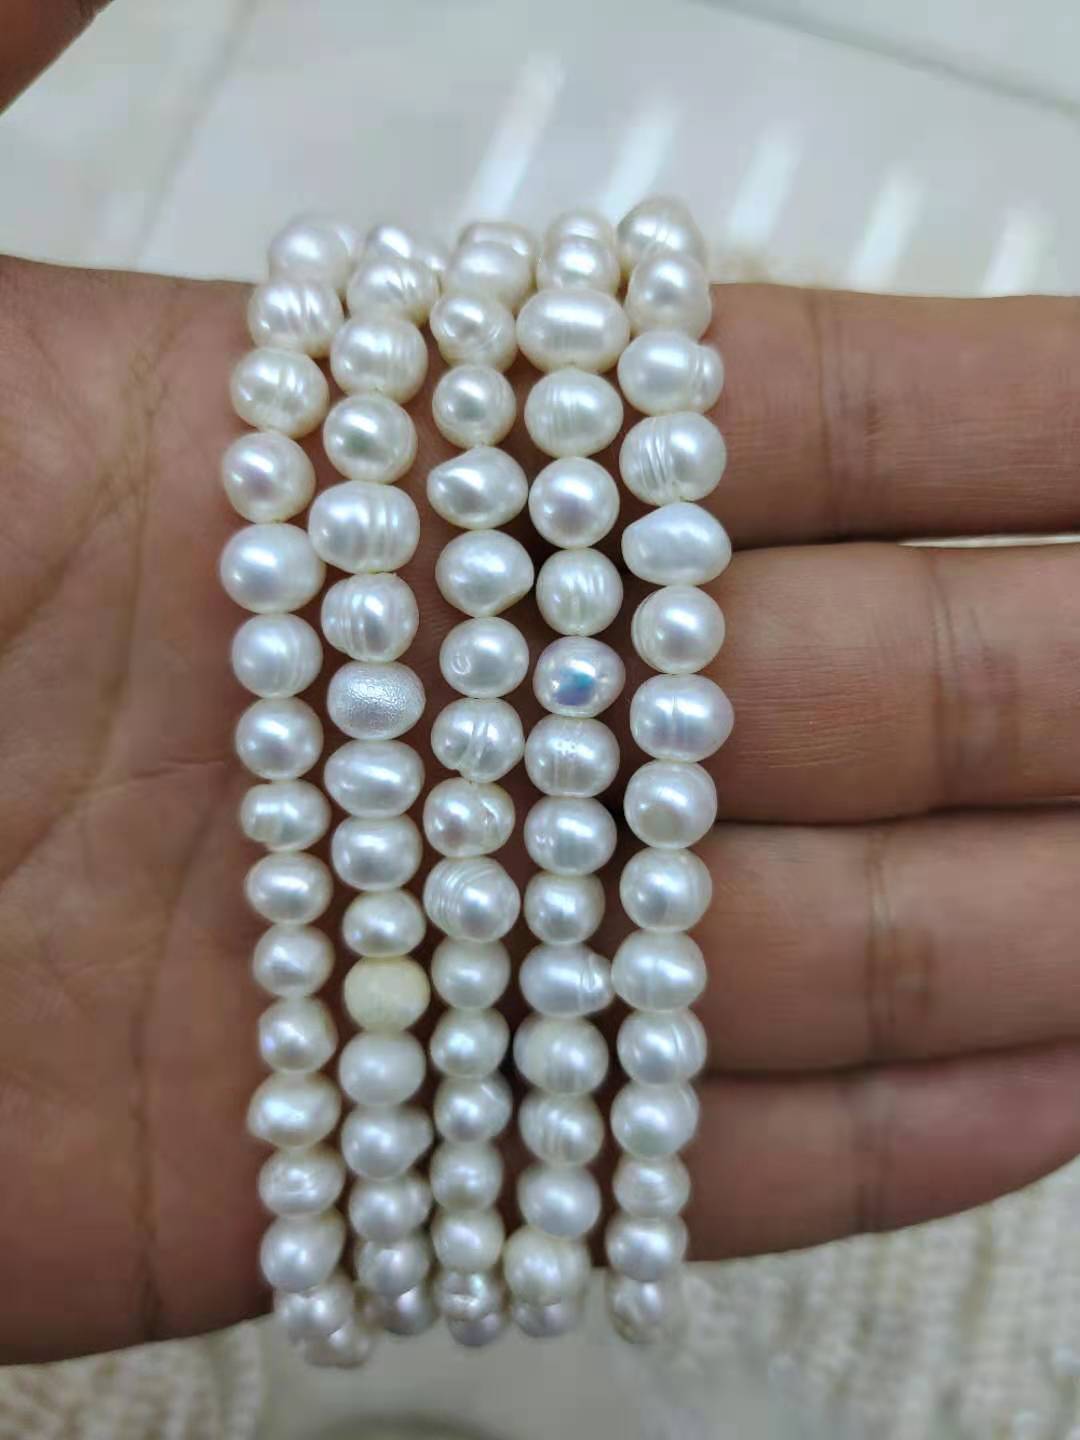 5-6 mm rice pearl bulk buy pearls side hole natural pearl loose wholesale nature freshwater pearl in strand